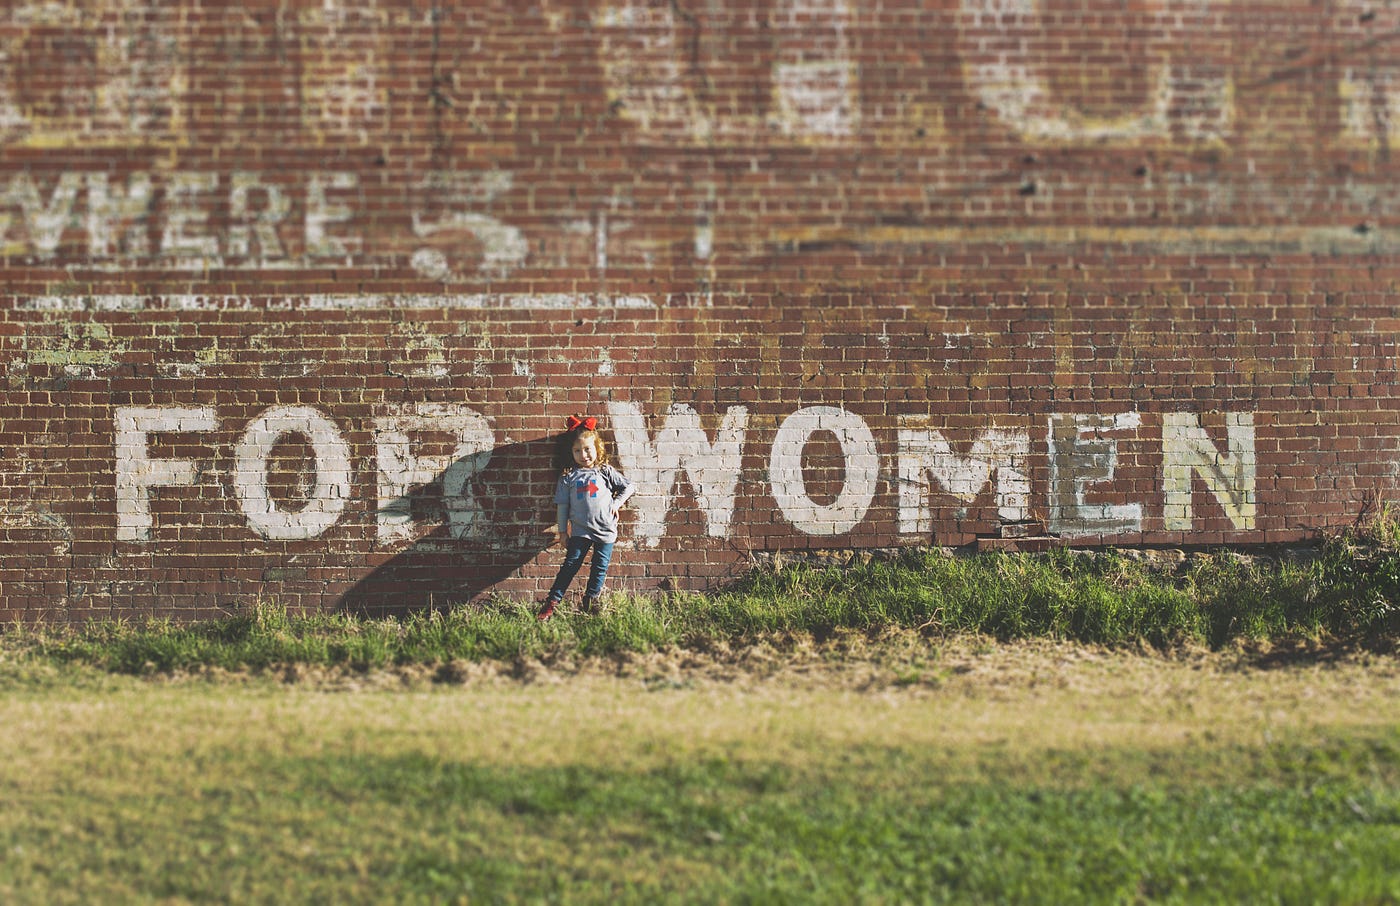 “FOR WOMEN” is spray painted on a brick wall. Grass is in the foreground. We don’t really know why there has been an increase in breast cancer among women in their 40s. But when more people in a certain age group are getting a condition, then screening of that group will be more impactful.